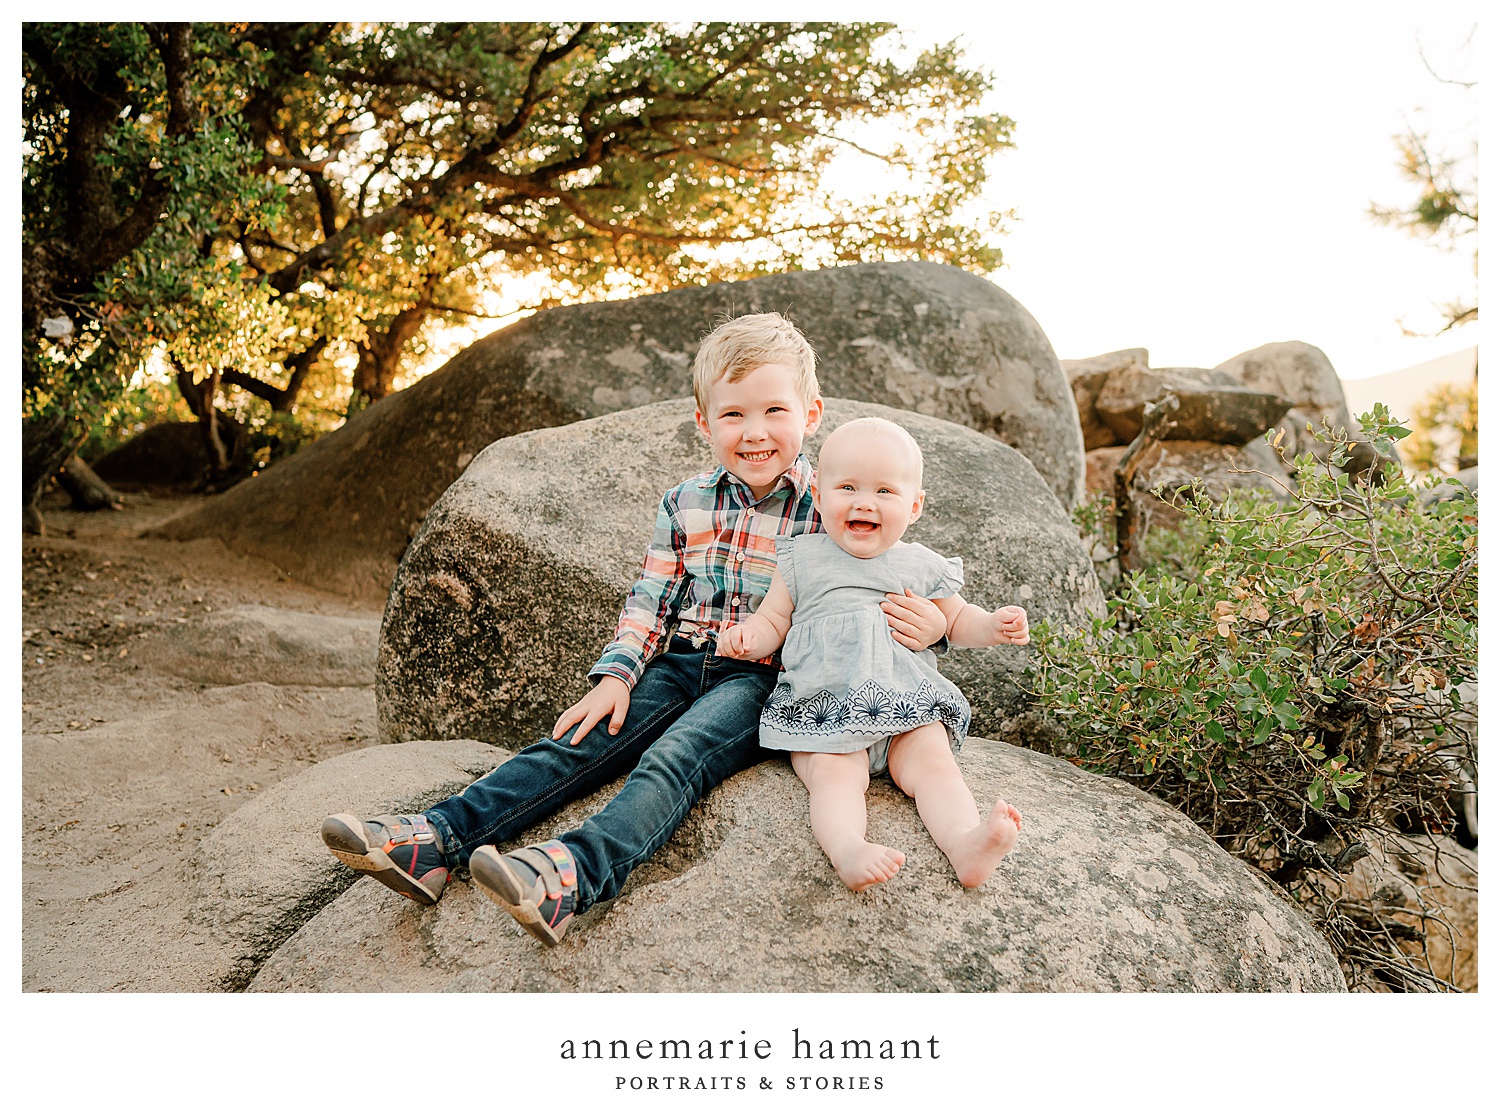  Sunset family photography at Sand Harbor, Lake Tahoe. AnneMarie Hamant uses sunset light and candid connections to photograph families on vacation in Lake Tahoe.  